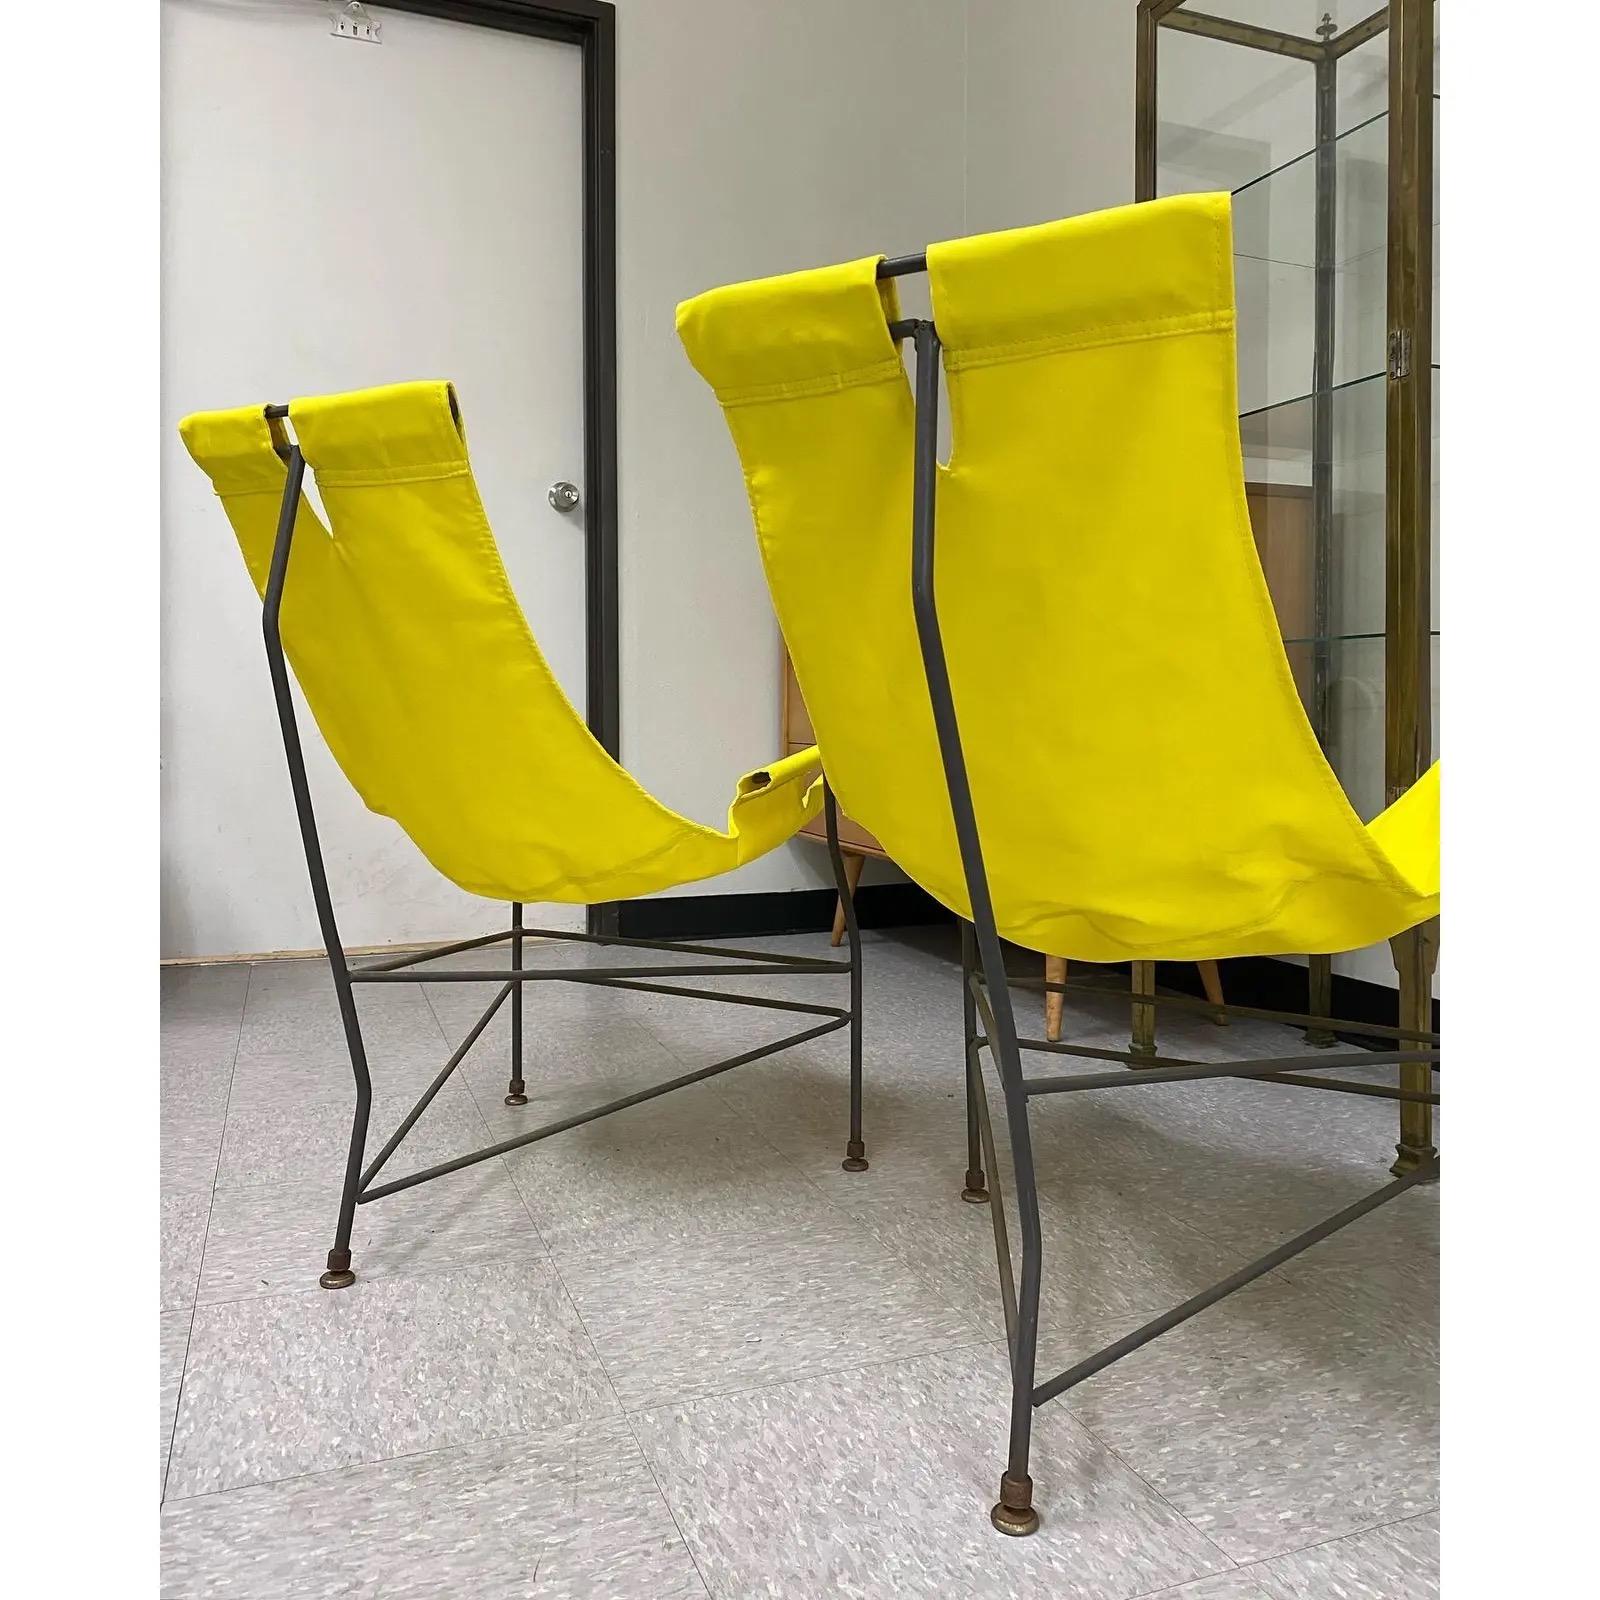 20th Century Midcentury Modern Jerry Johnson Iron Sling Chairs, a Pair For Sale